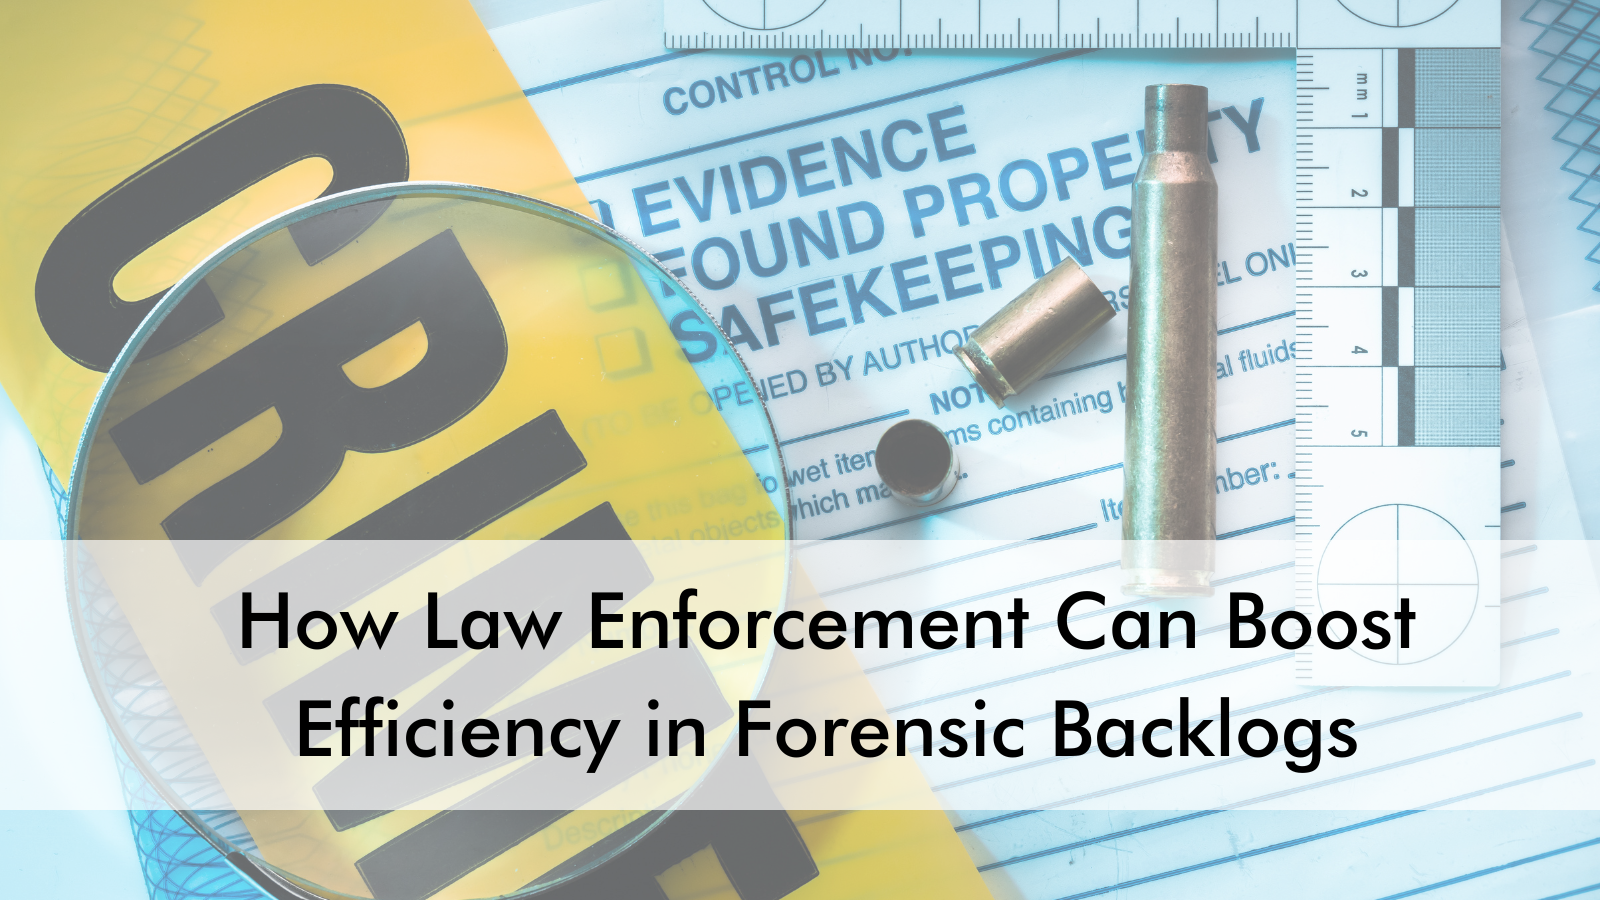 How Law Enforcement Can Boost Efficiency in Forensic Backlogs